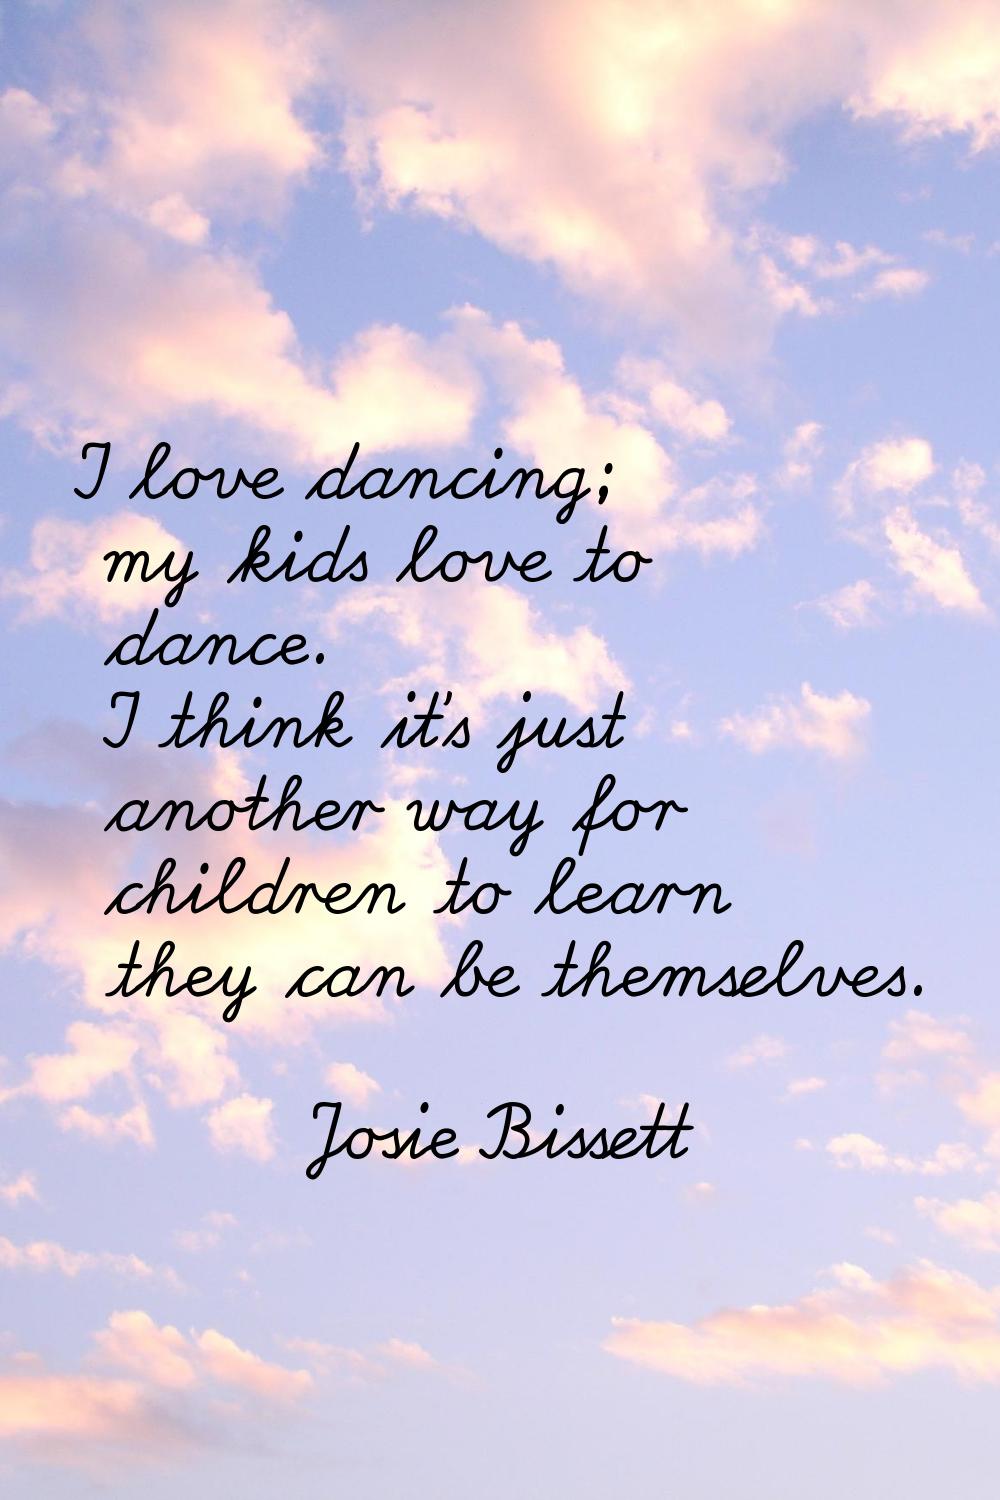 I love dancing; my kids love to dance. I think it's just another way for children to learn they can